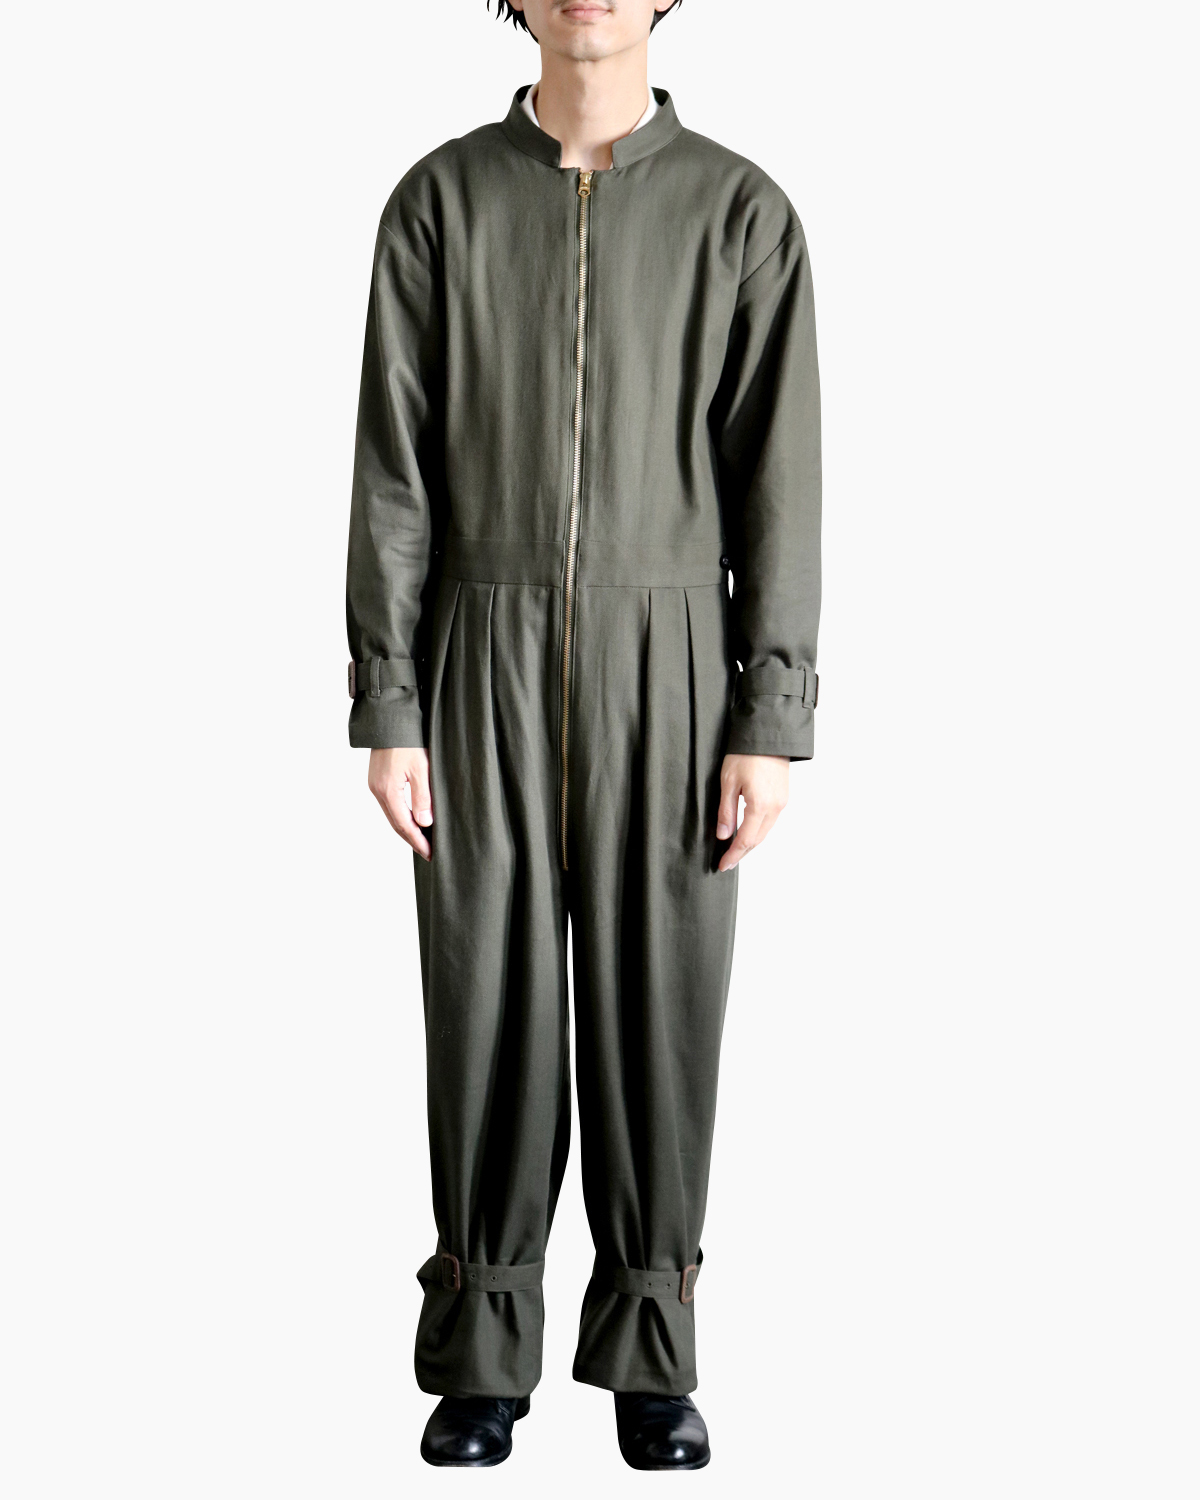 NEAT｜Herringbone｜JUMPSUIT - Olive｜Exclusive｜PRODUCT｜Continuer